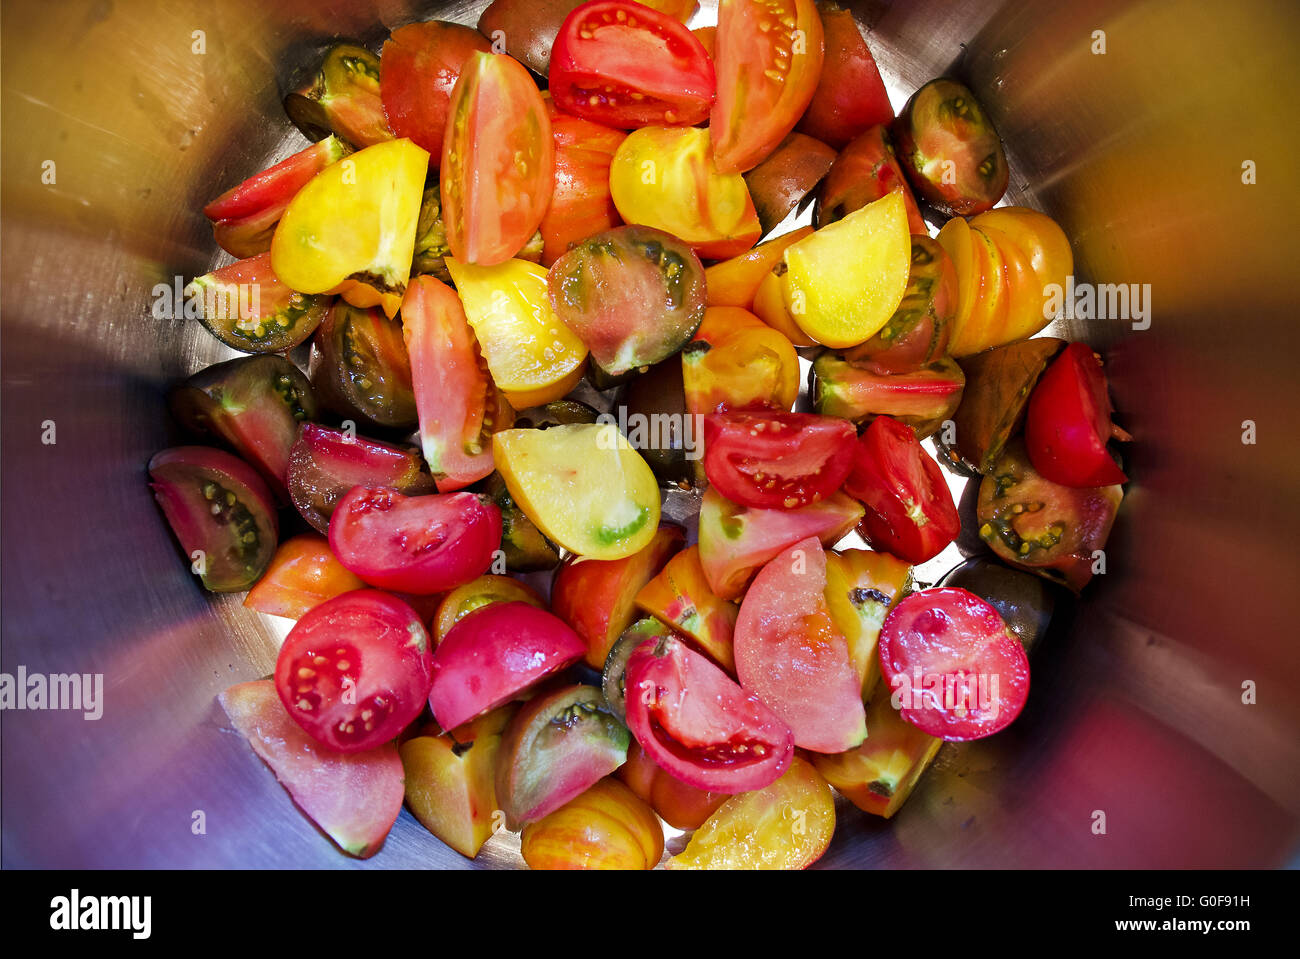 different-colored rare tomatoes Stock Photo